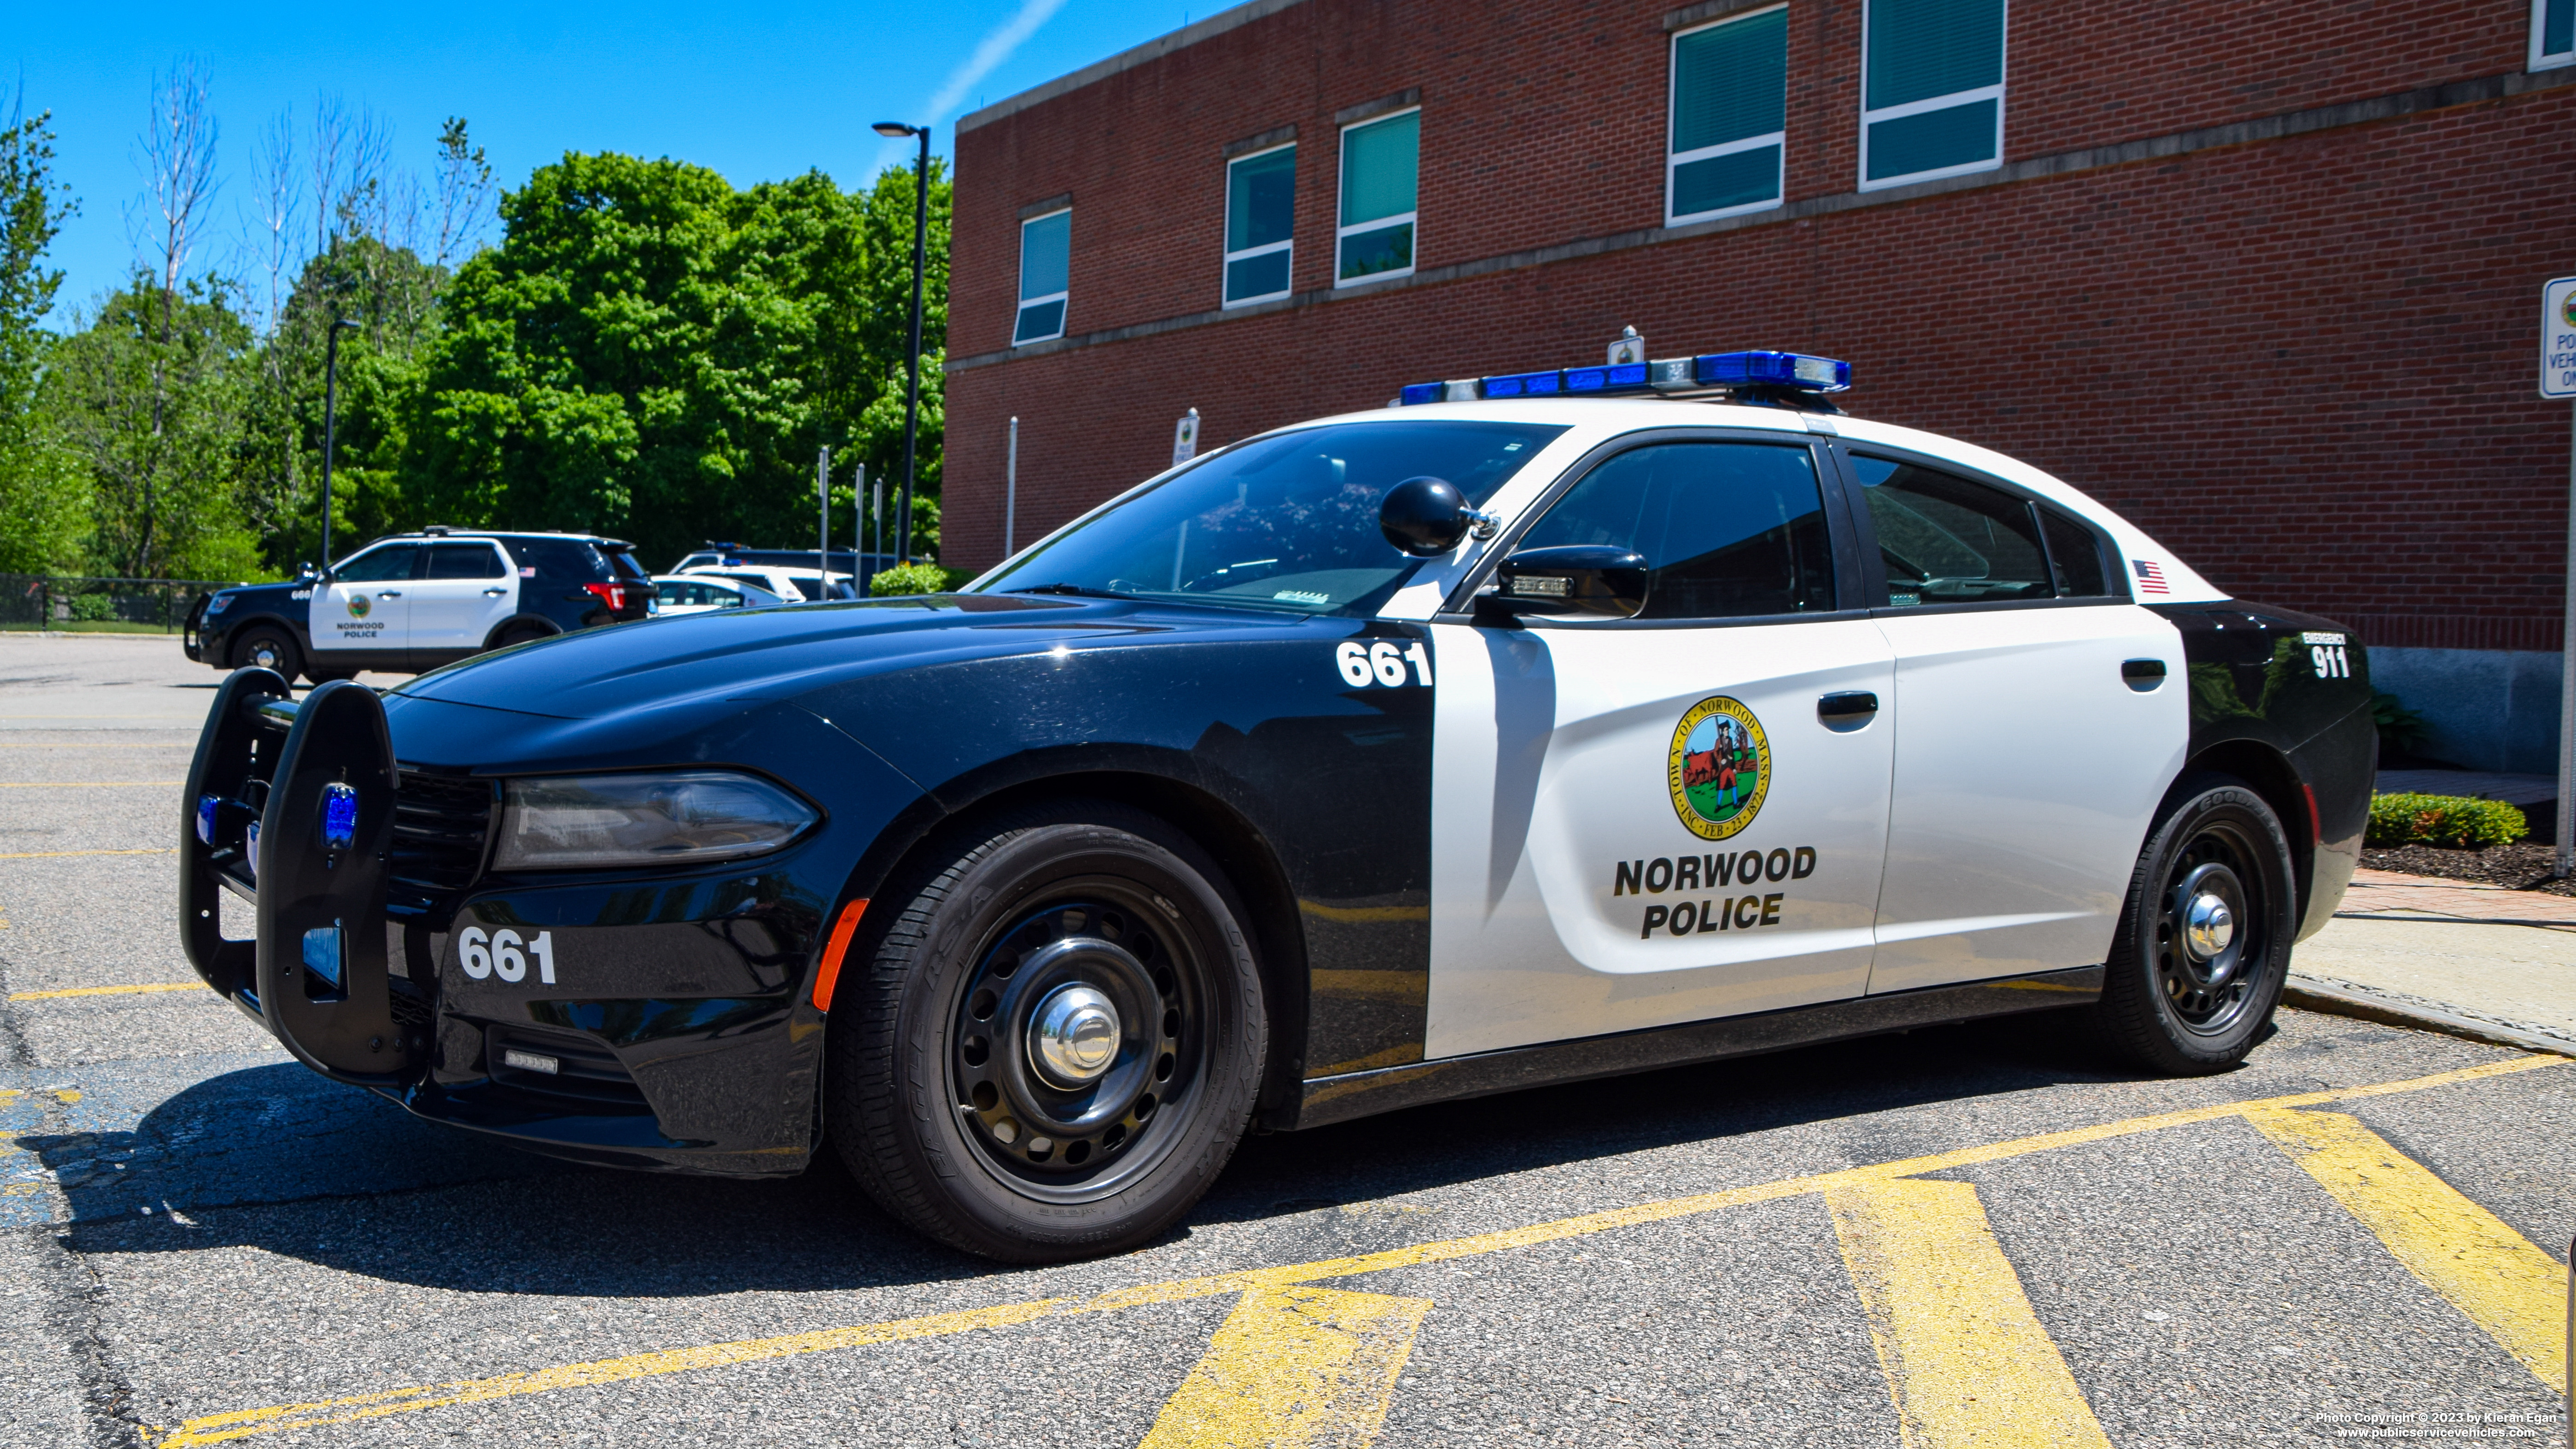 A photo  of Norwood Police
            Cruiser 661, a 2015-2020 Dodge Charger             taken by Kieran Egan